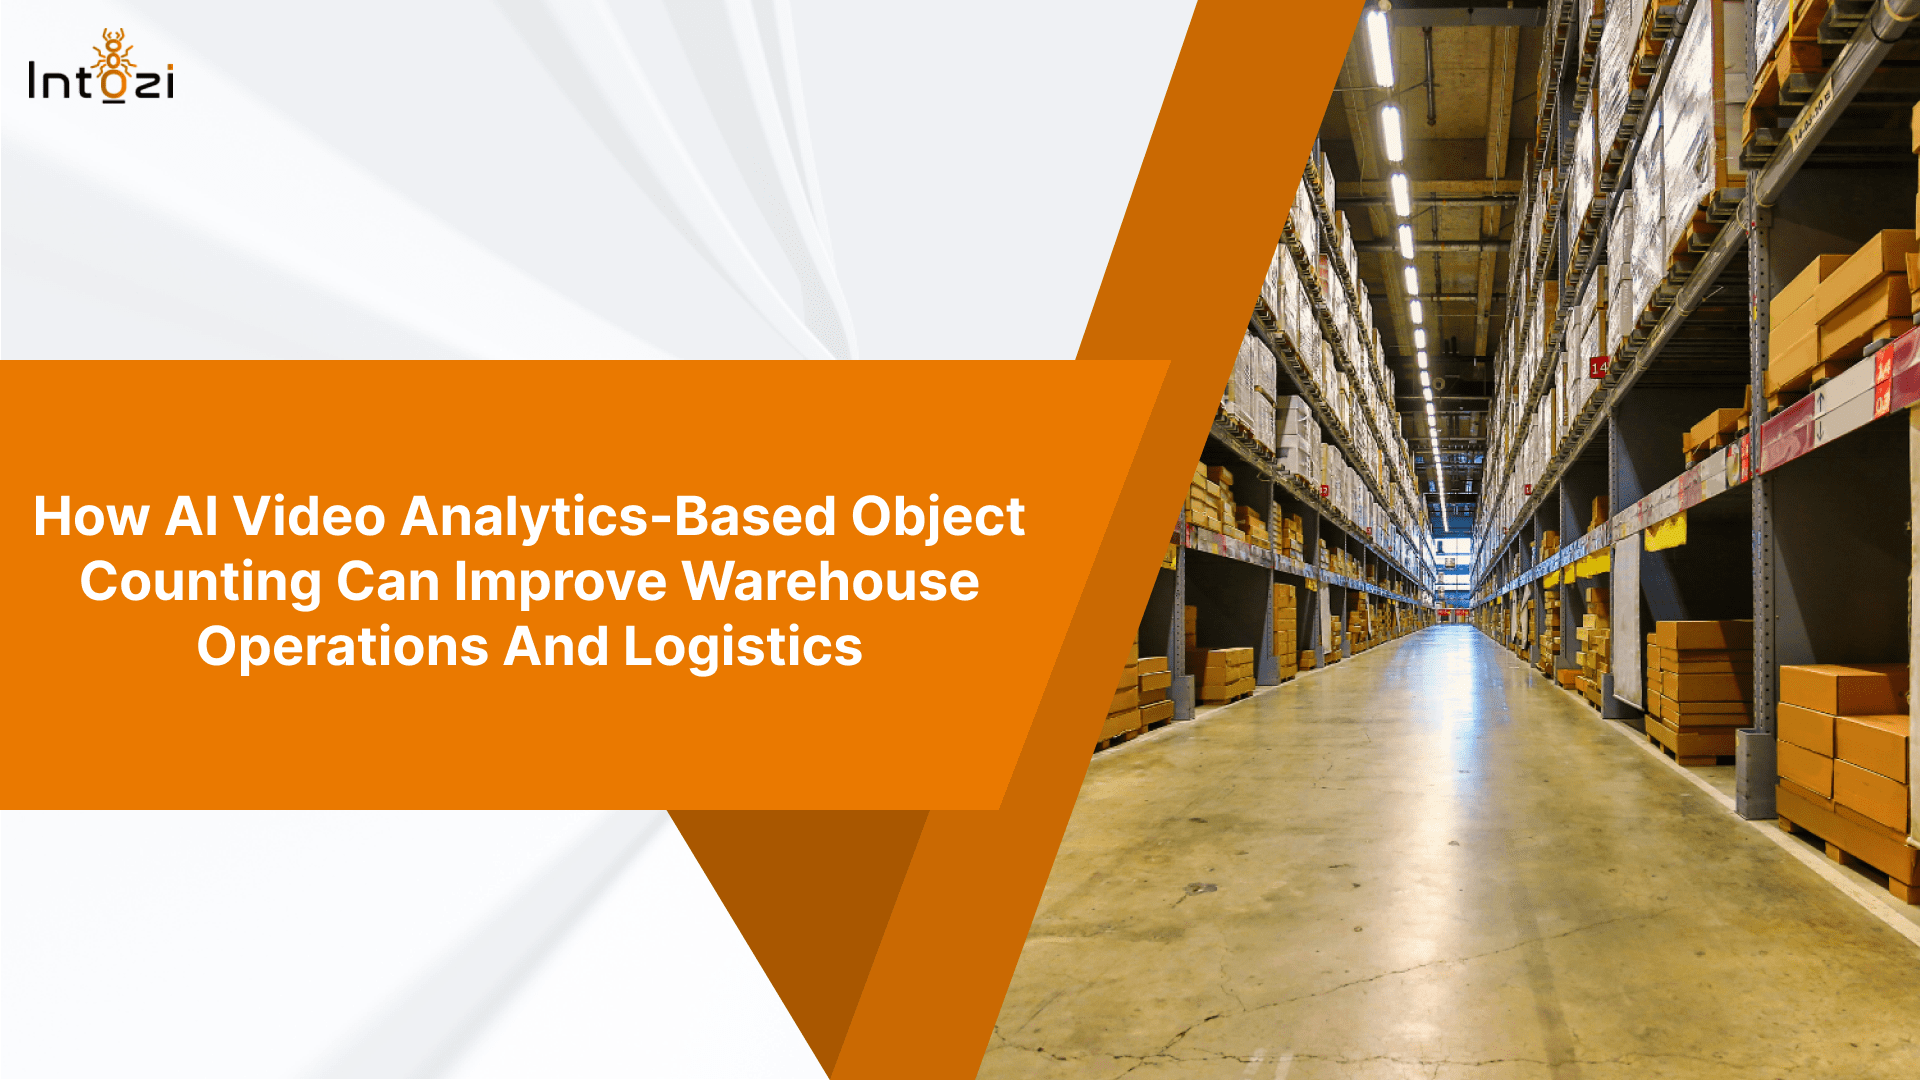 You are currently viewing Intozi AI Video Analytics-Based Object Counting Can Improve Warehouse Operations and Logistics